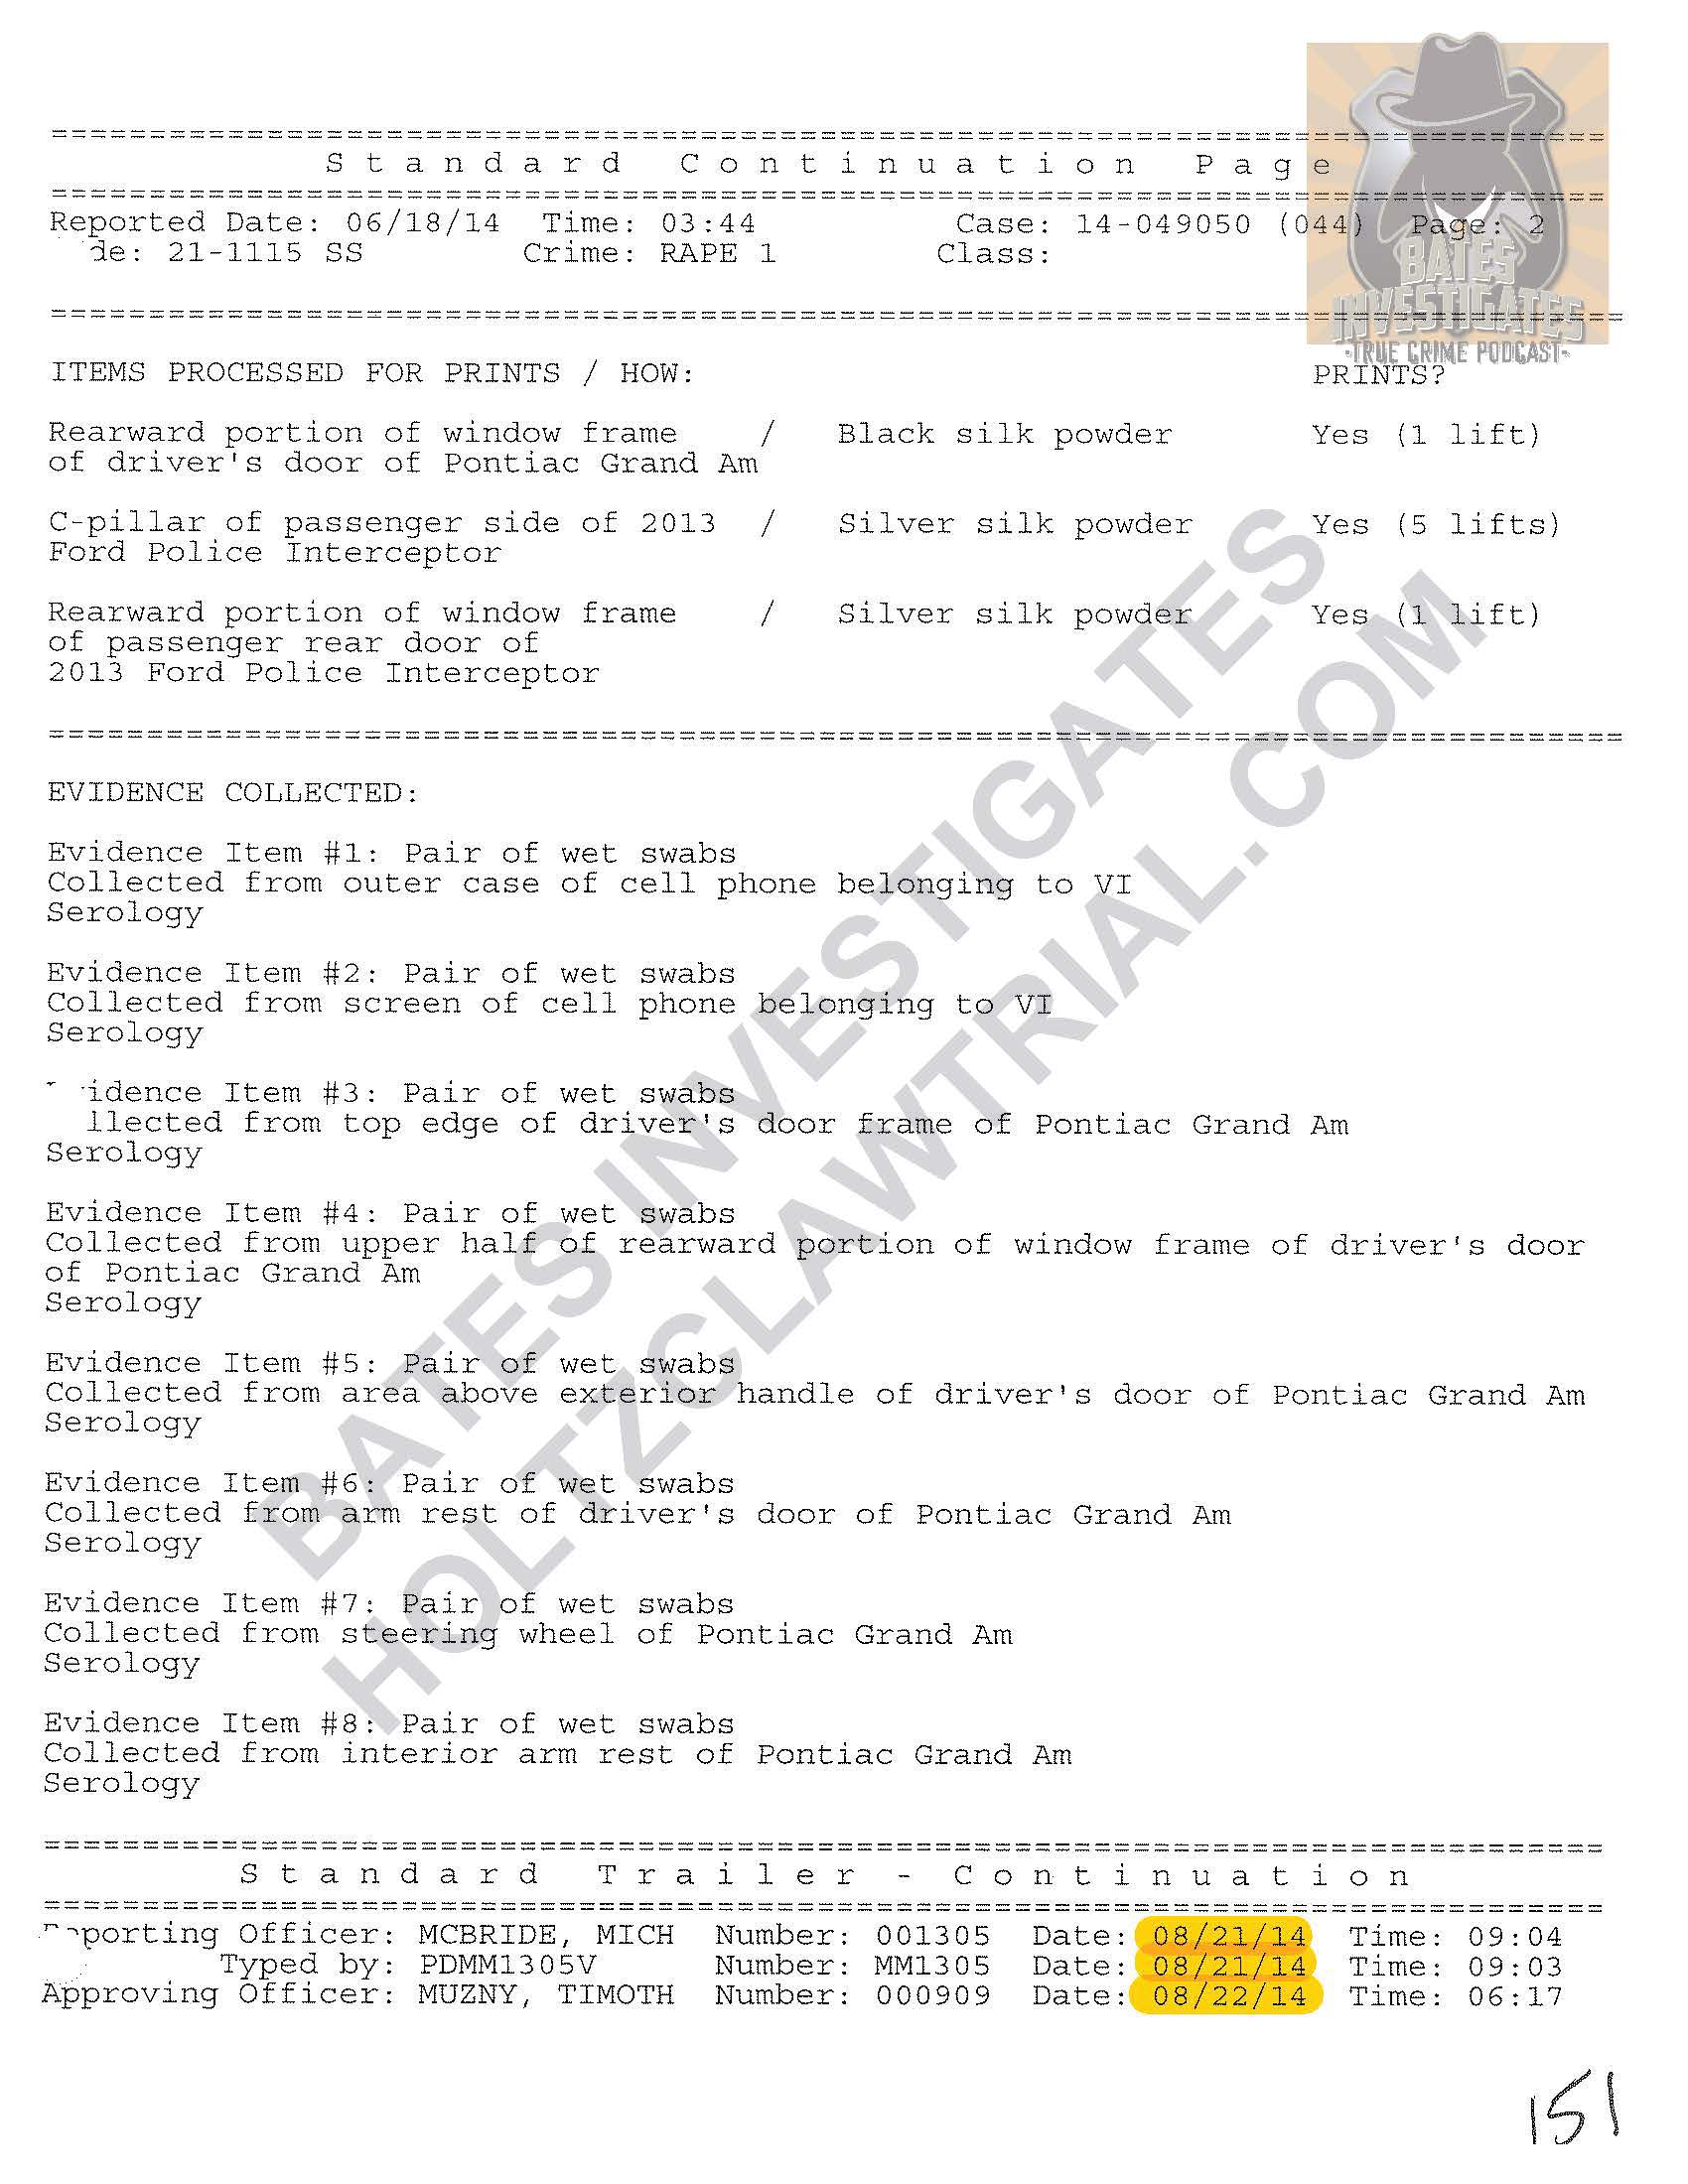 Holtzclaw - Ep02 - Police Reports Watermarked_Page_44.jpg